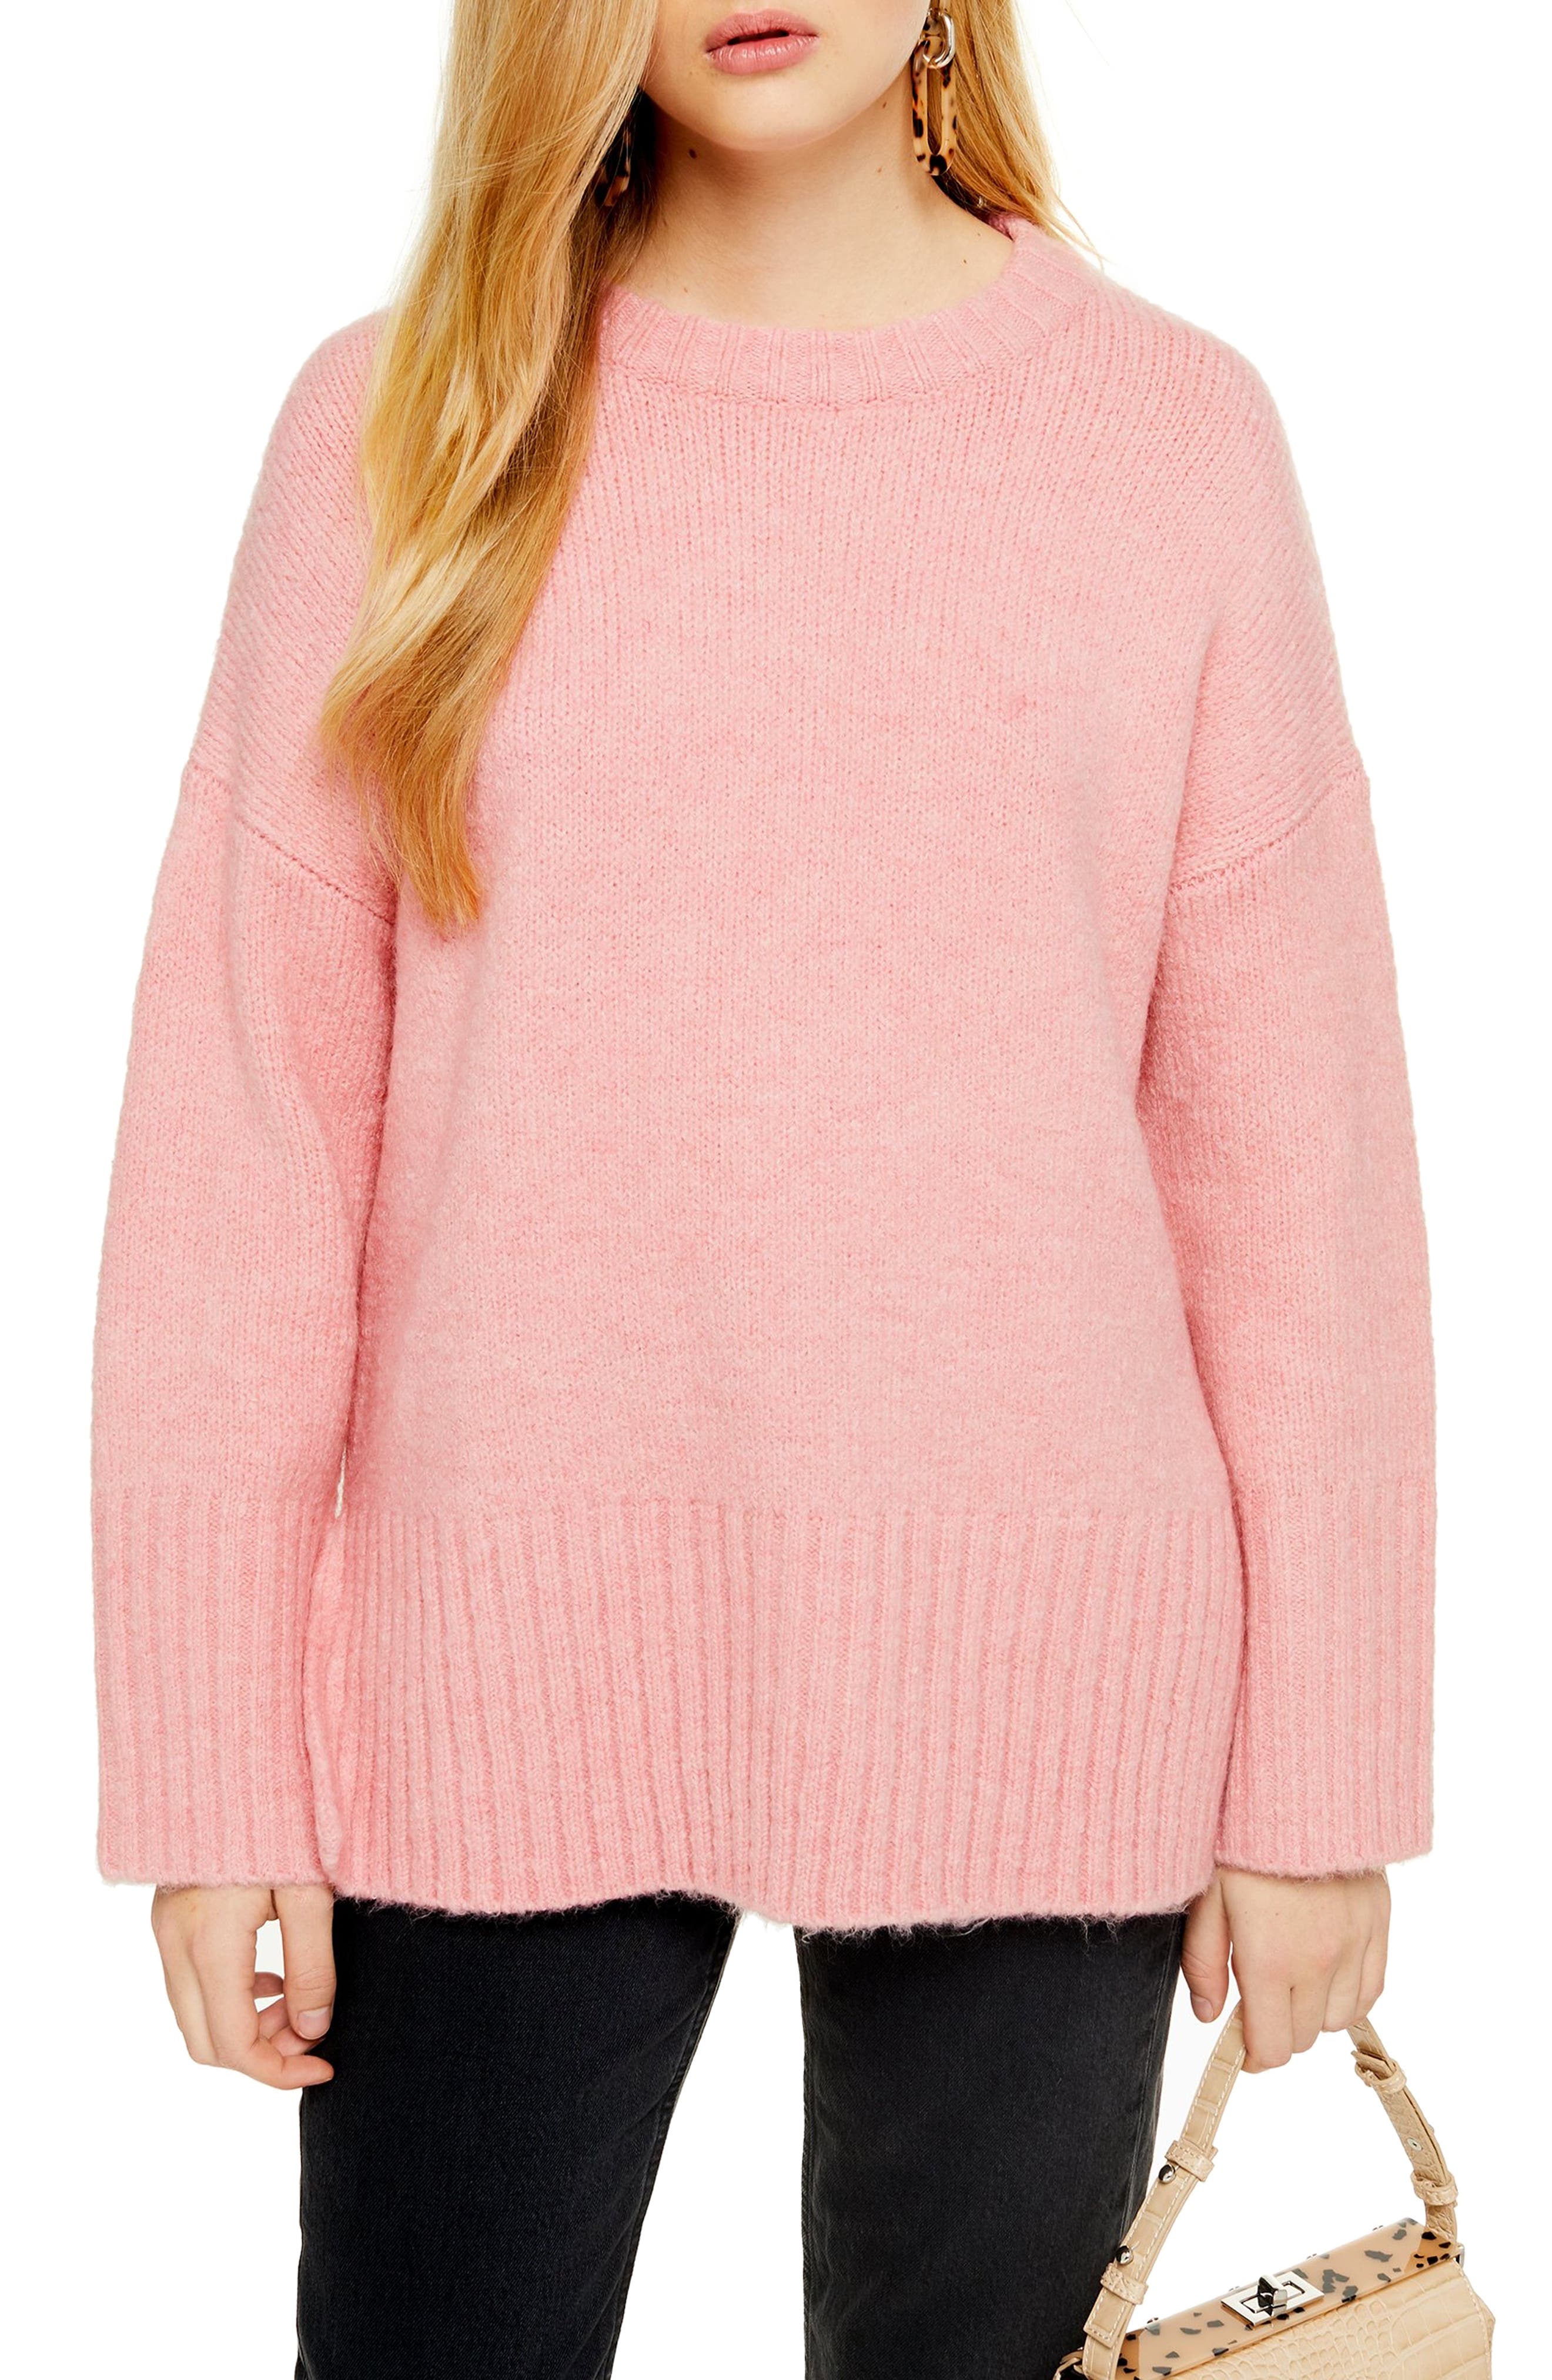 clearance sweaters